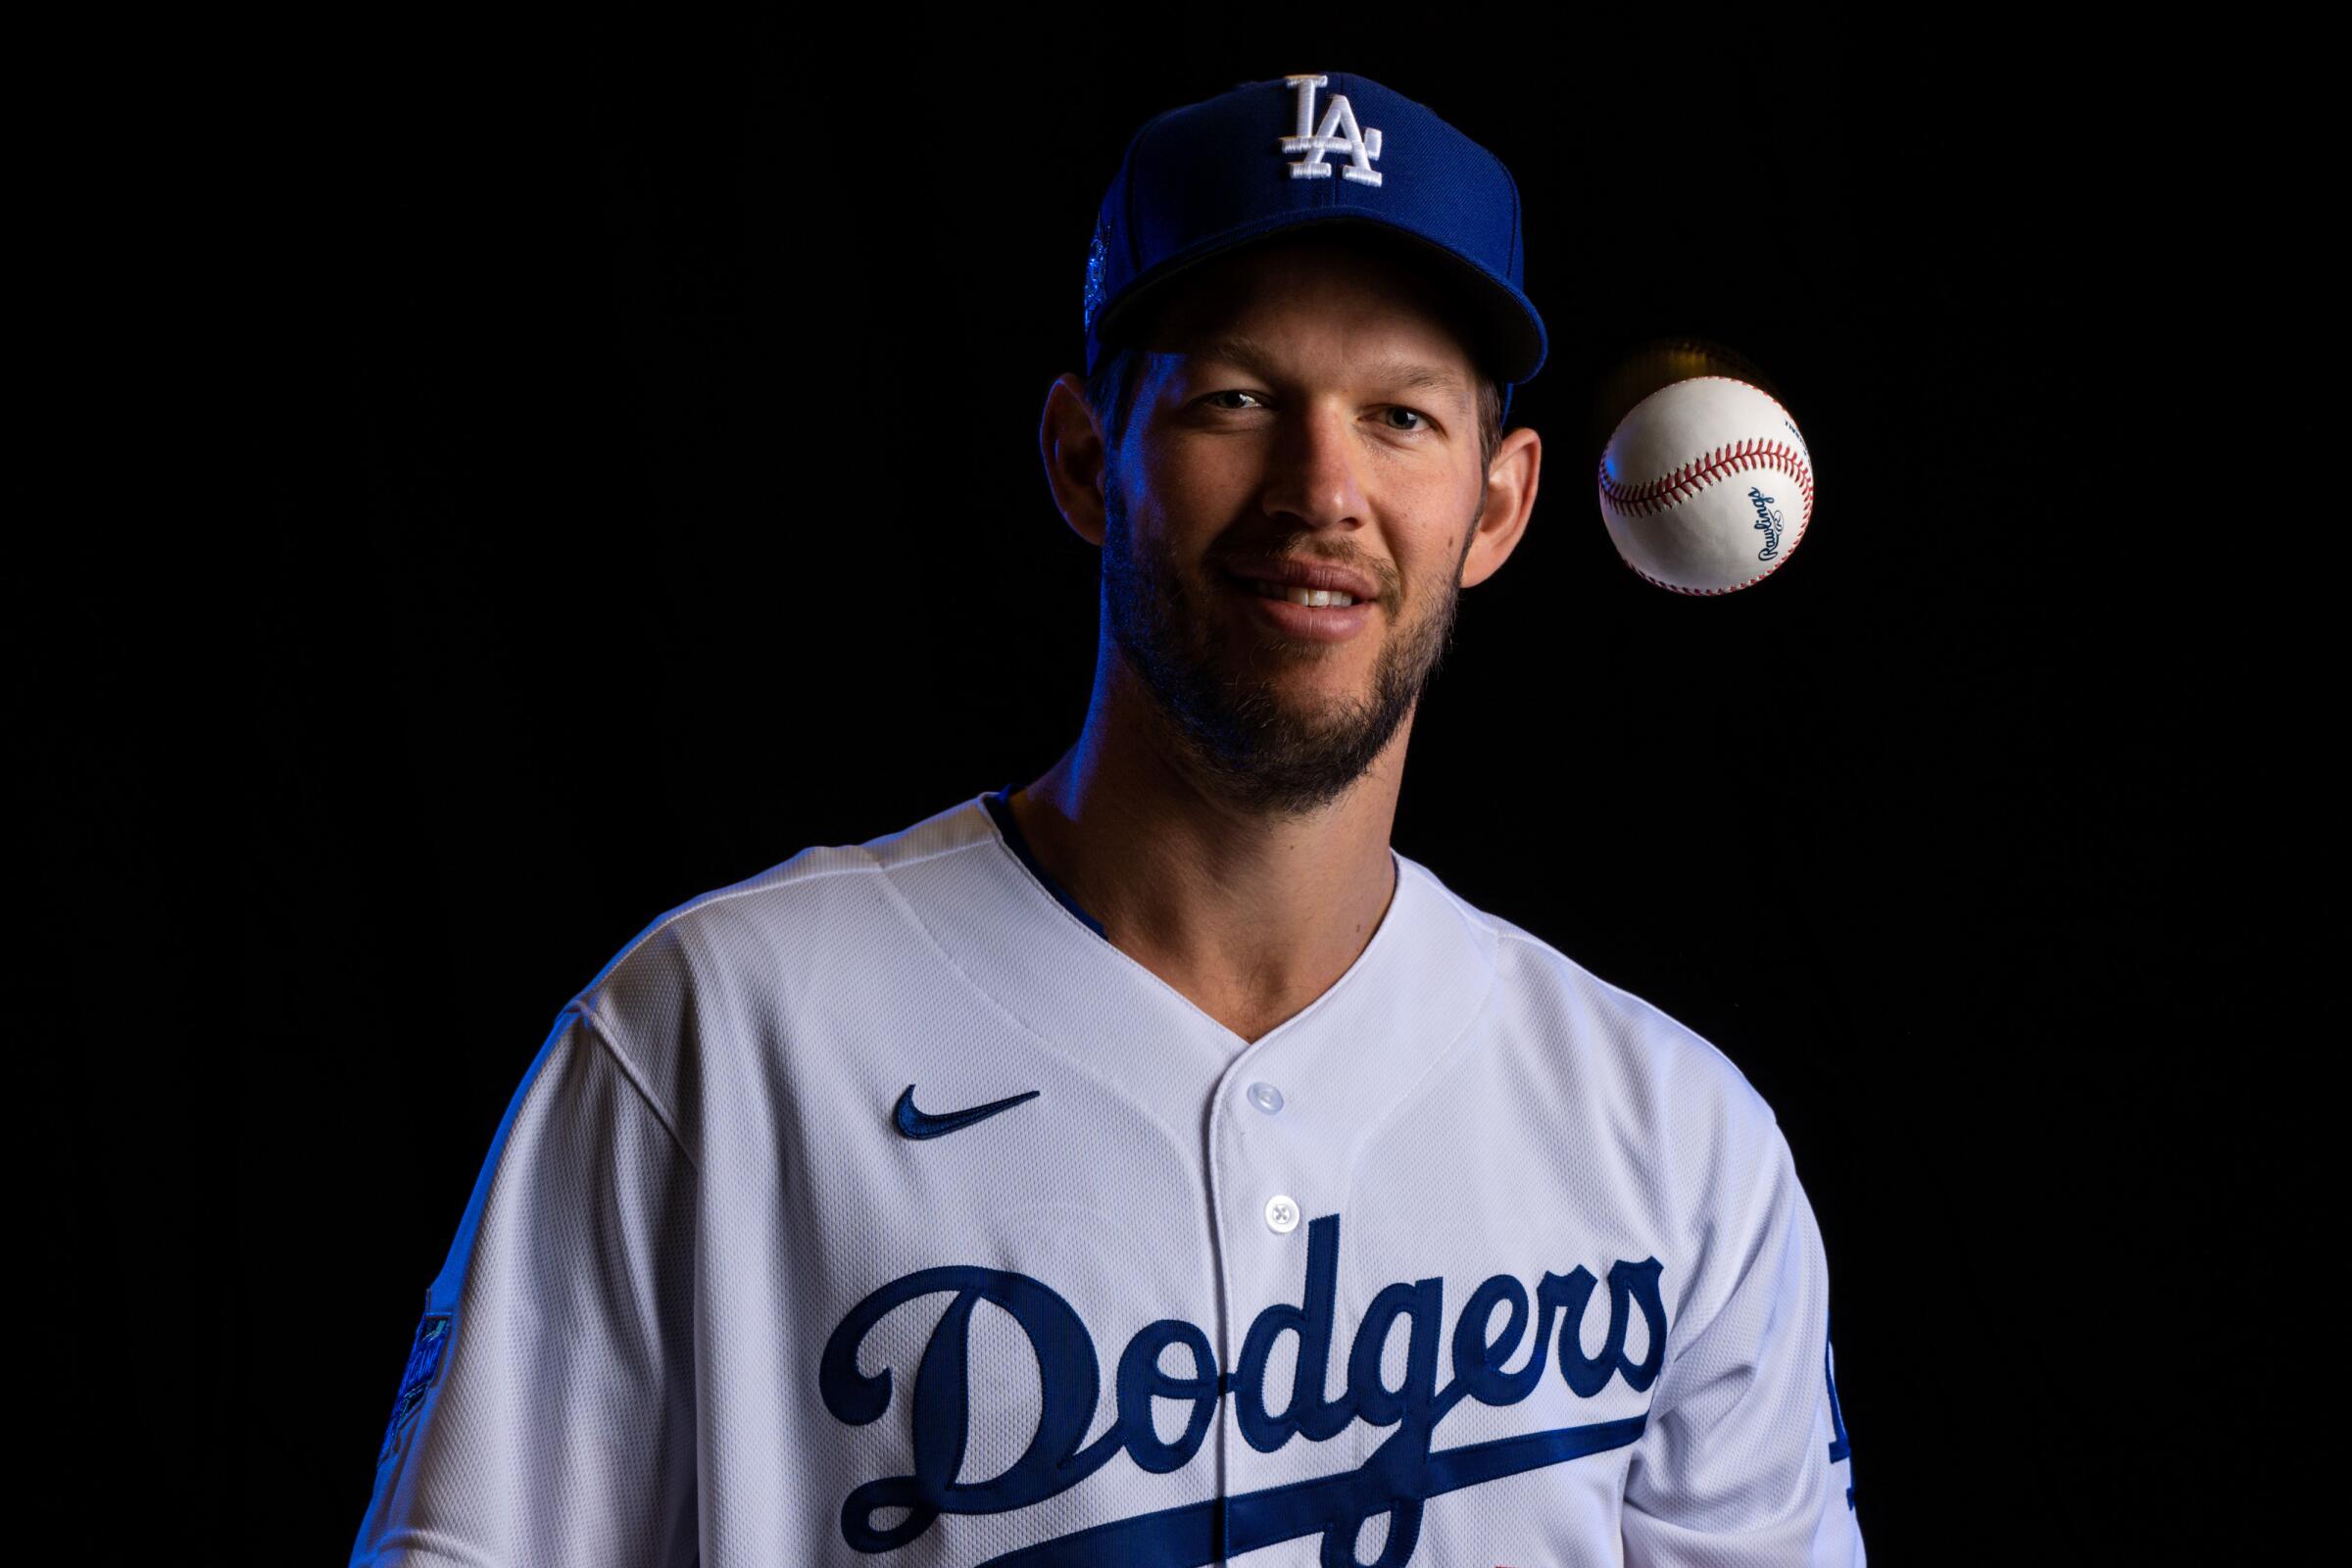 Dodgers pitcher Clayton Kershaw (22) poses for a portrait.